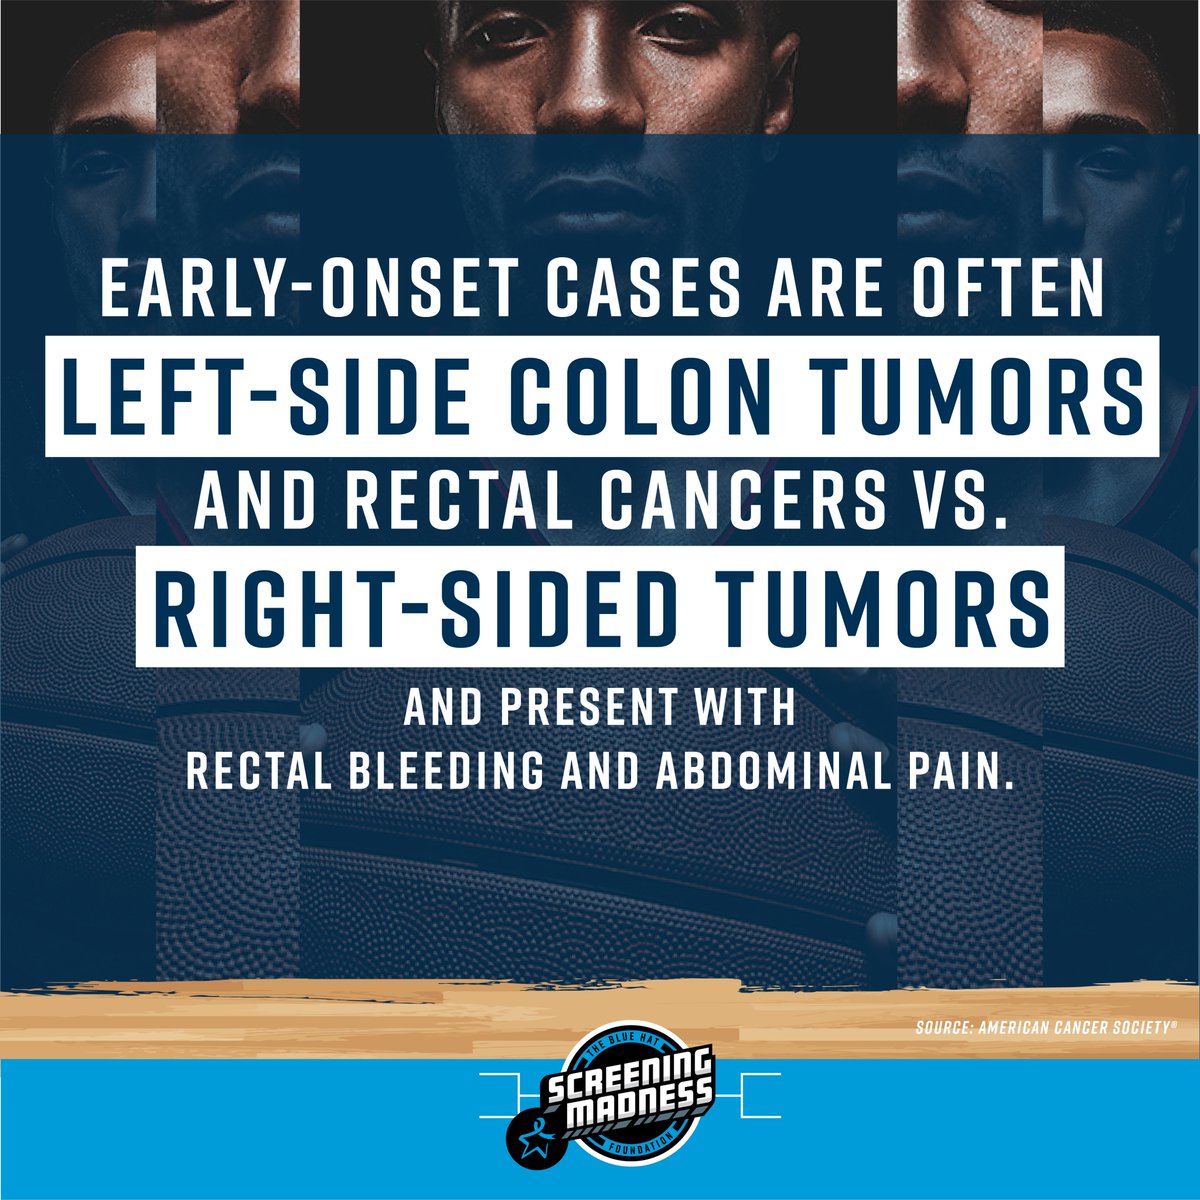 I was 35, diagnosed with #LynchSyndrome, and my tumor was on the right side in my colon. Found out I had a family history 11yrs after my diagnosis. #ScreeningMadness #EOCRC #coloncancer #familyhistory #genetictesting.